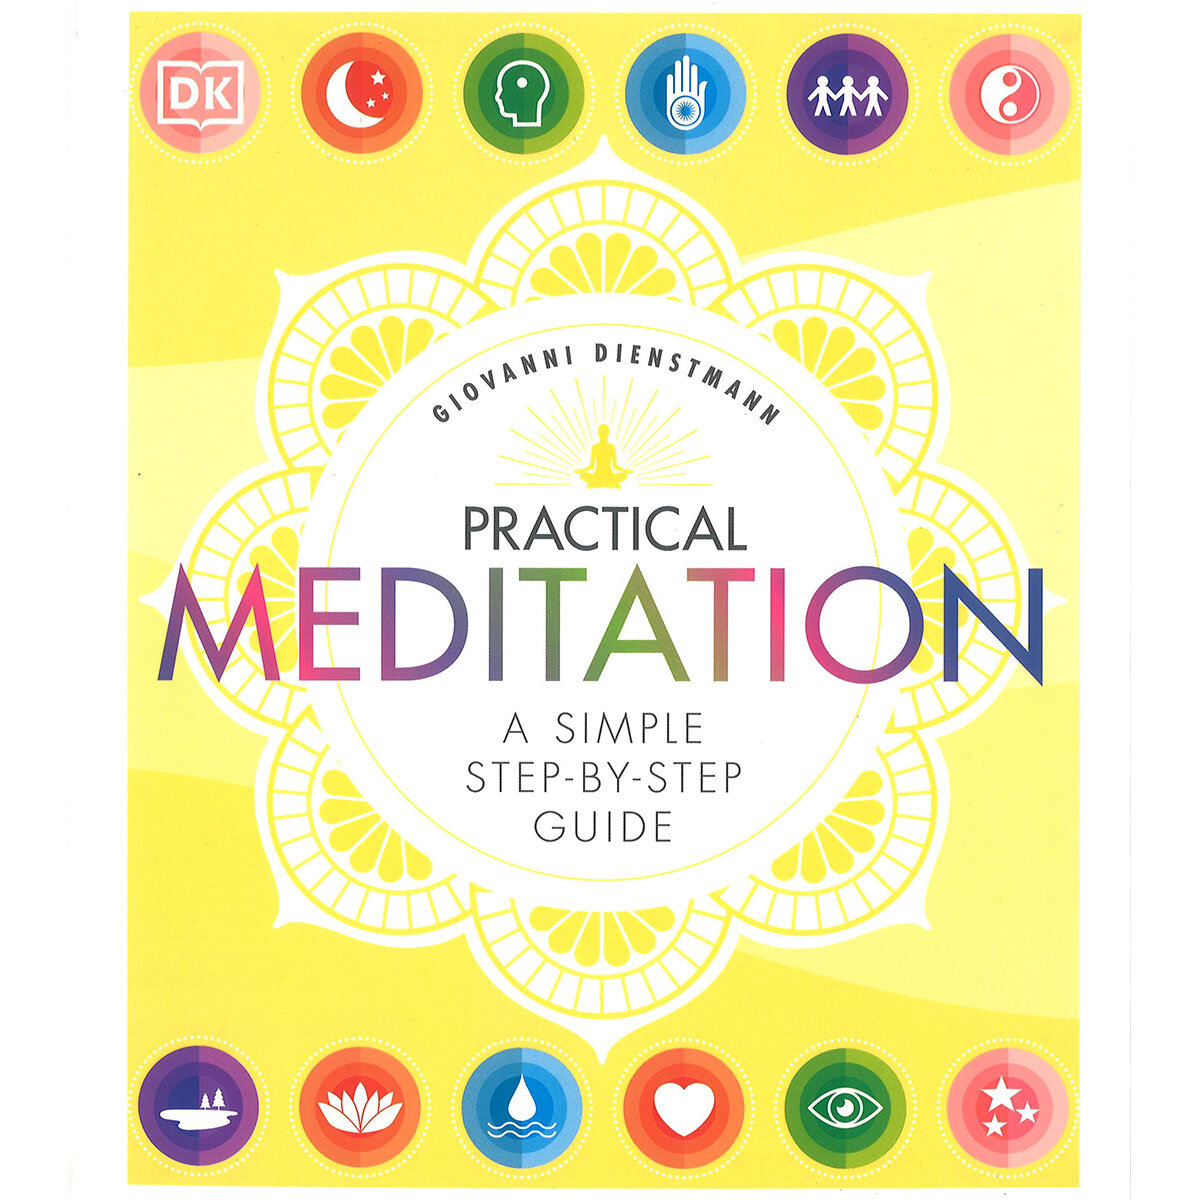 A Simple Step-By-Step Guide: Practical Meditation, Giovanni Dienstmann